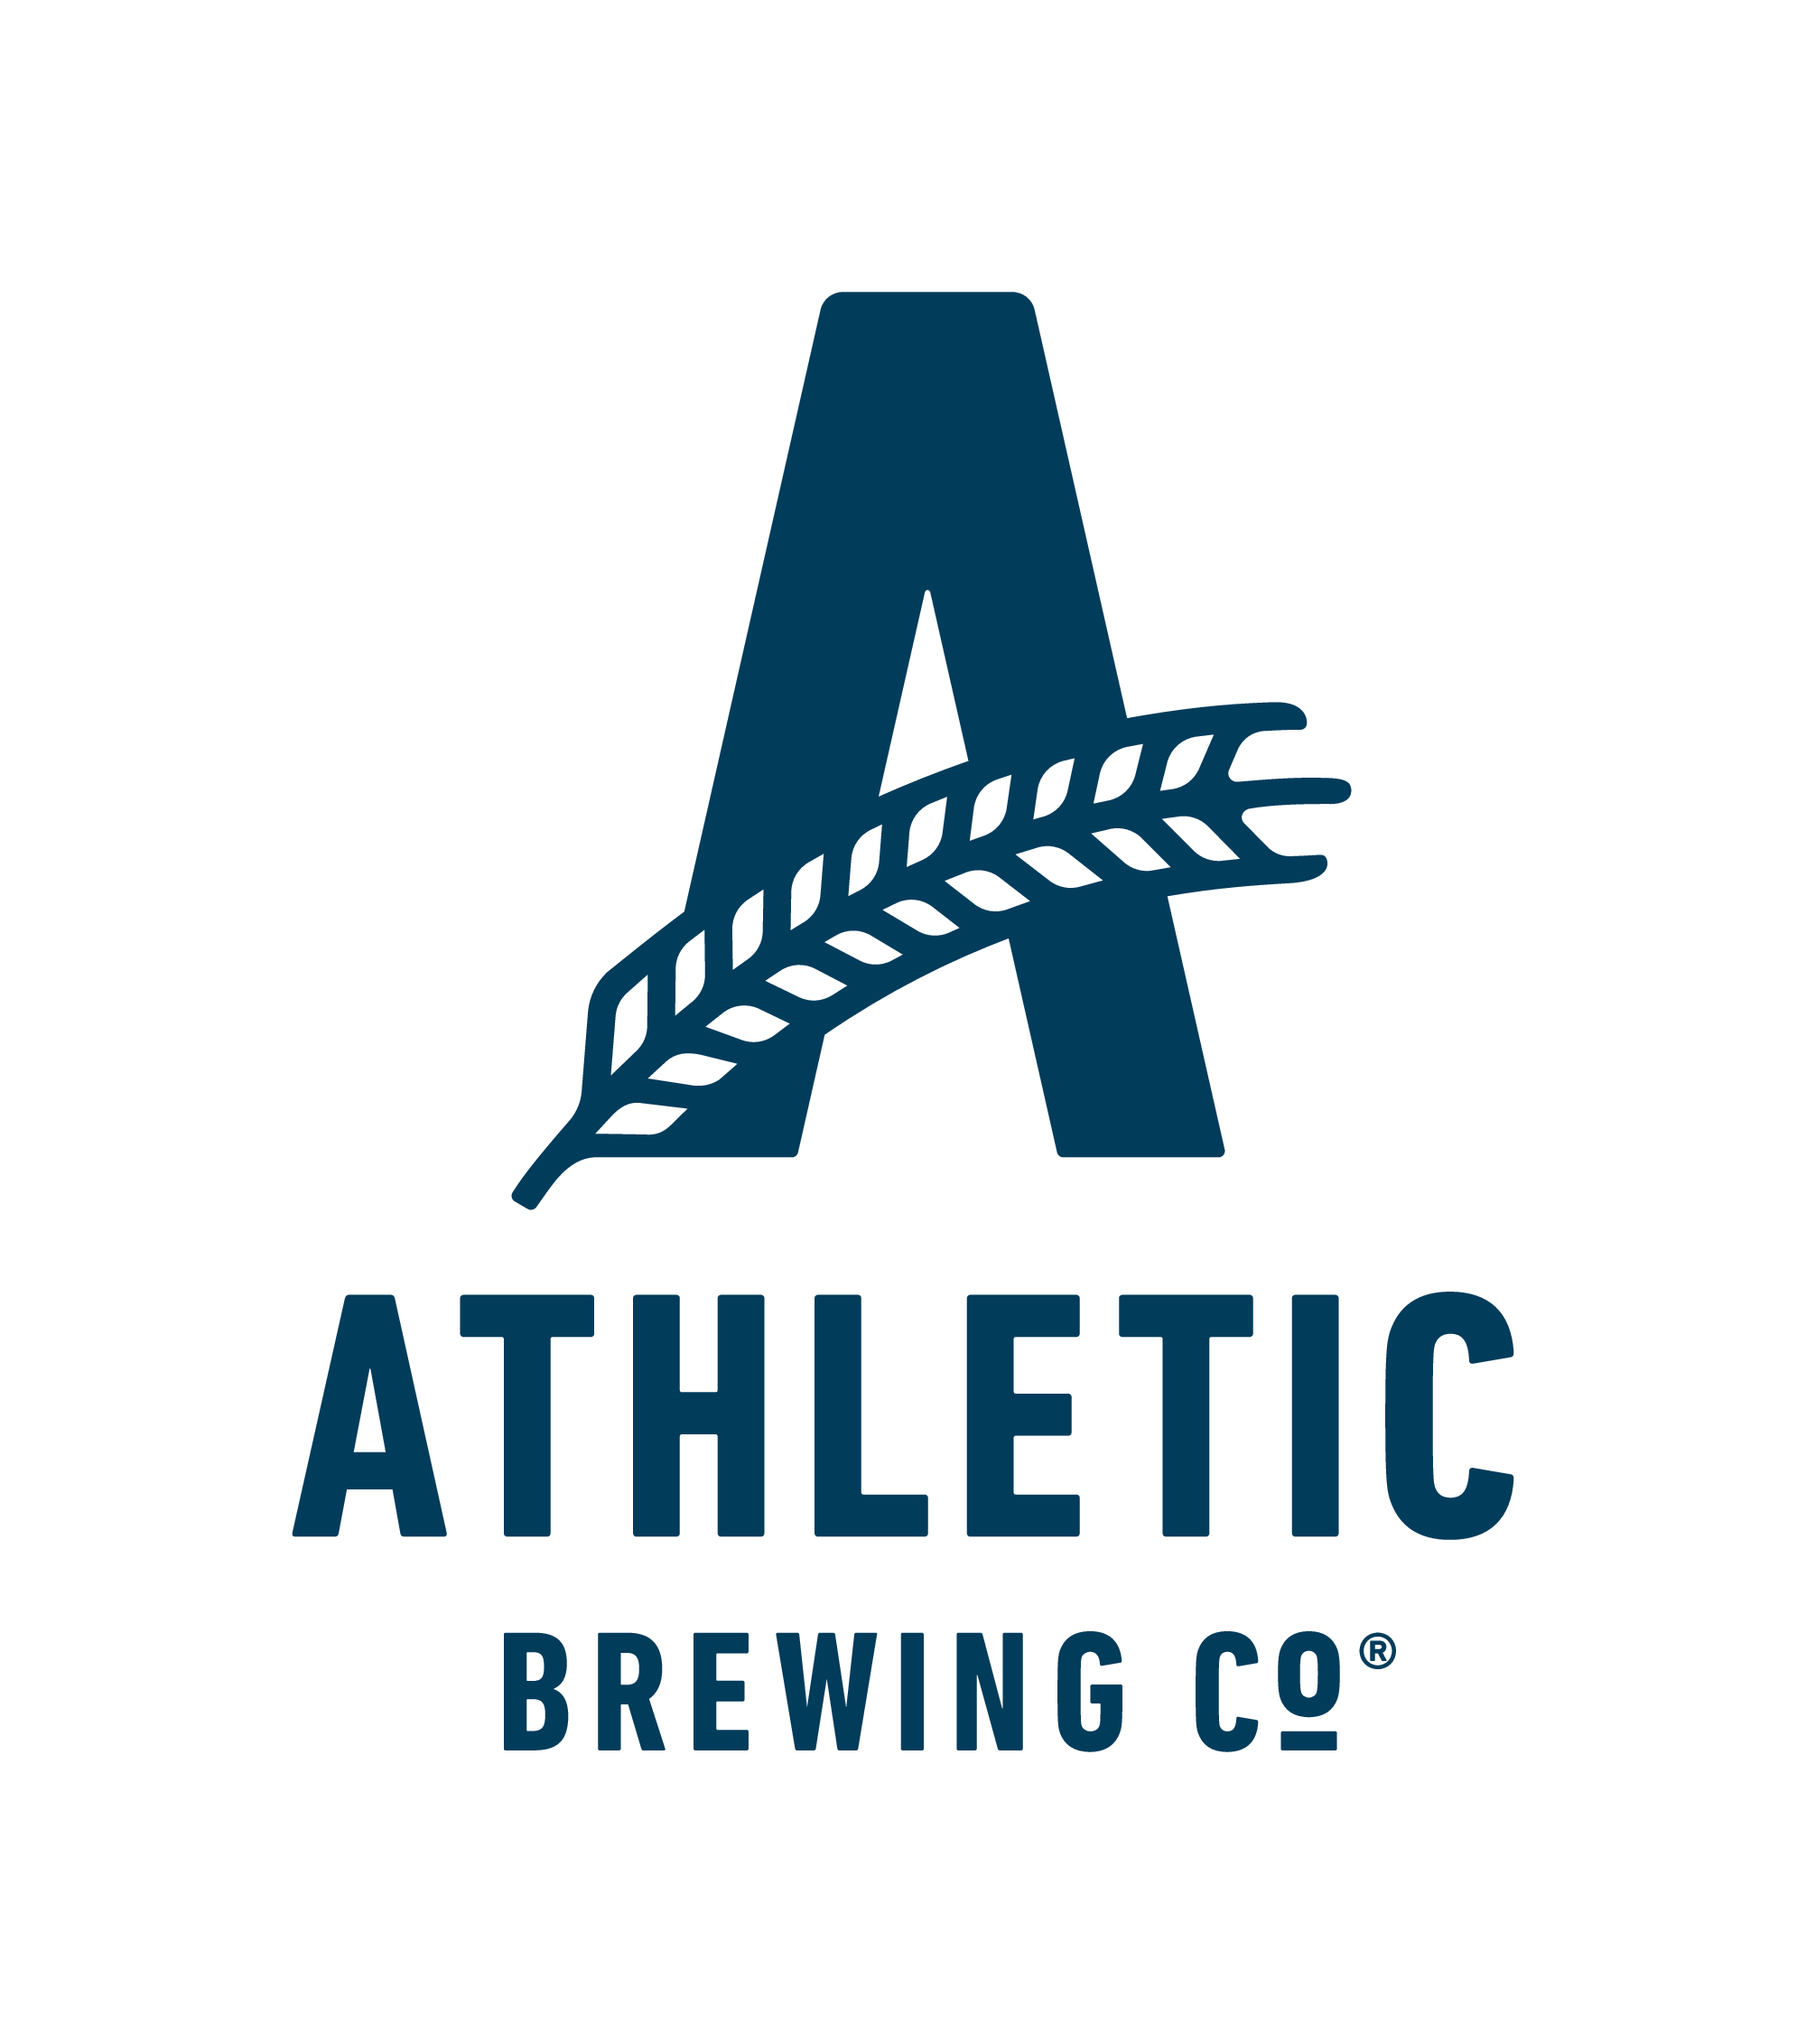 Athletic Brewing Company - logo.png